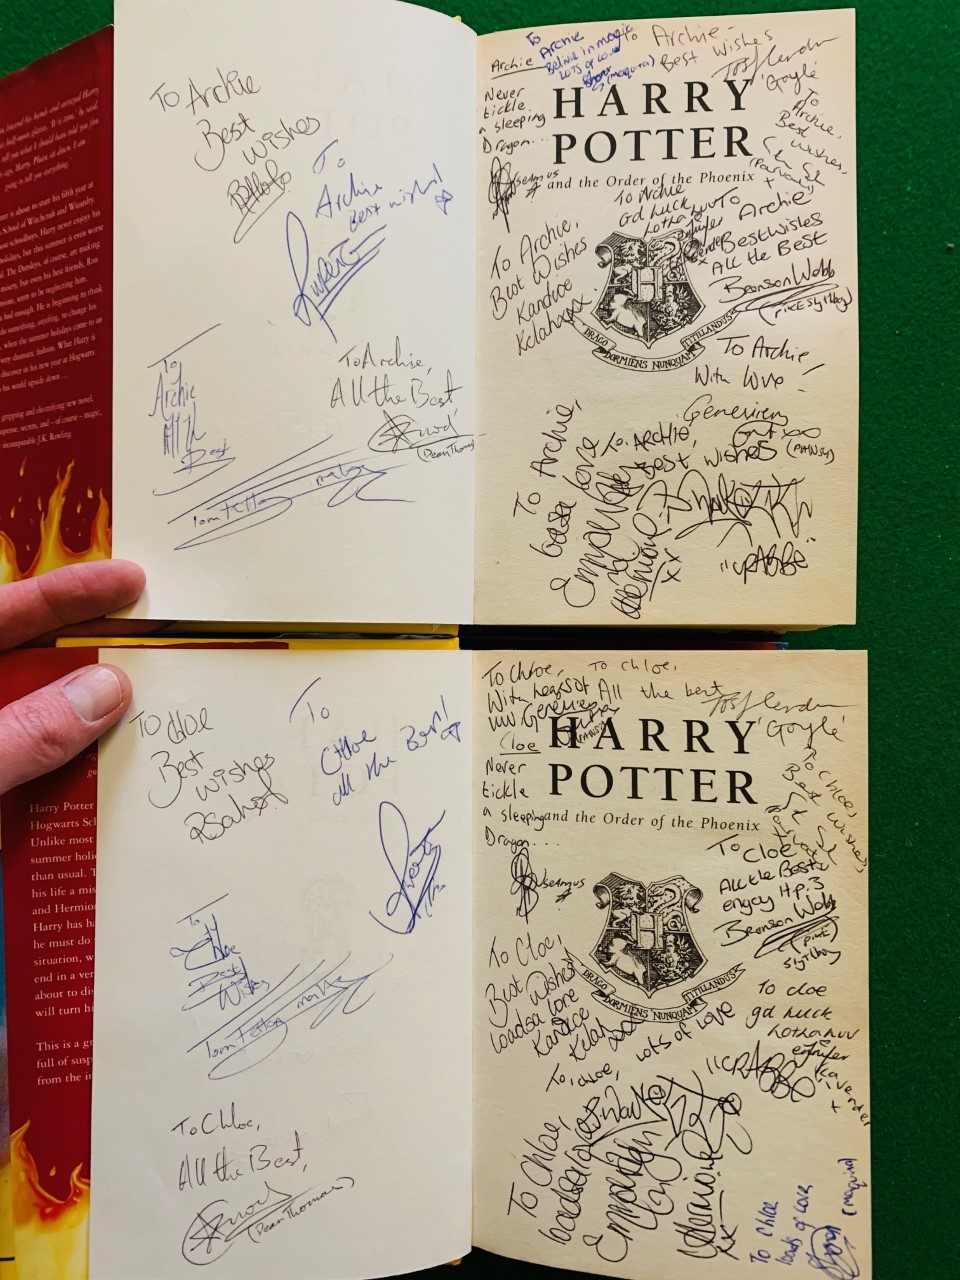 Many of the lots are signed by cast members, and some are signed by the series’s author.